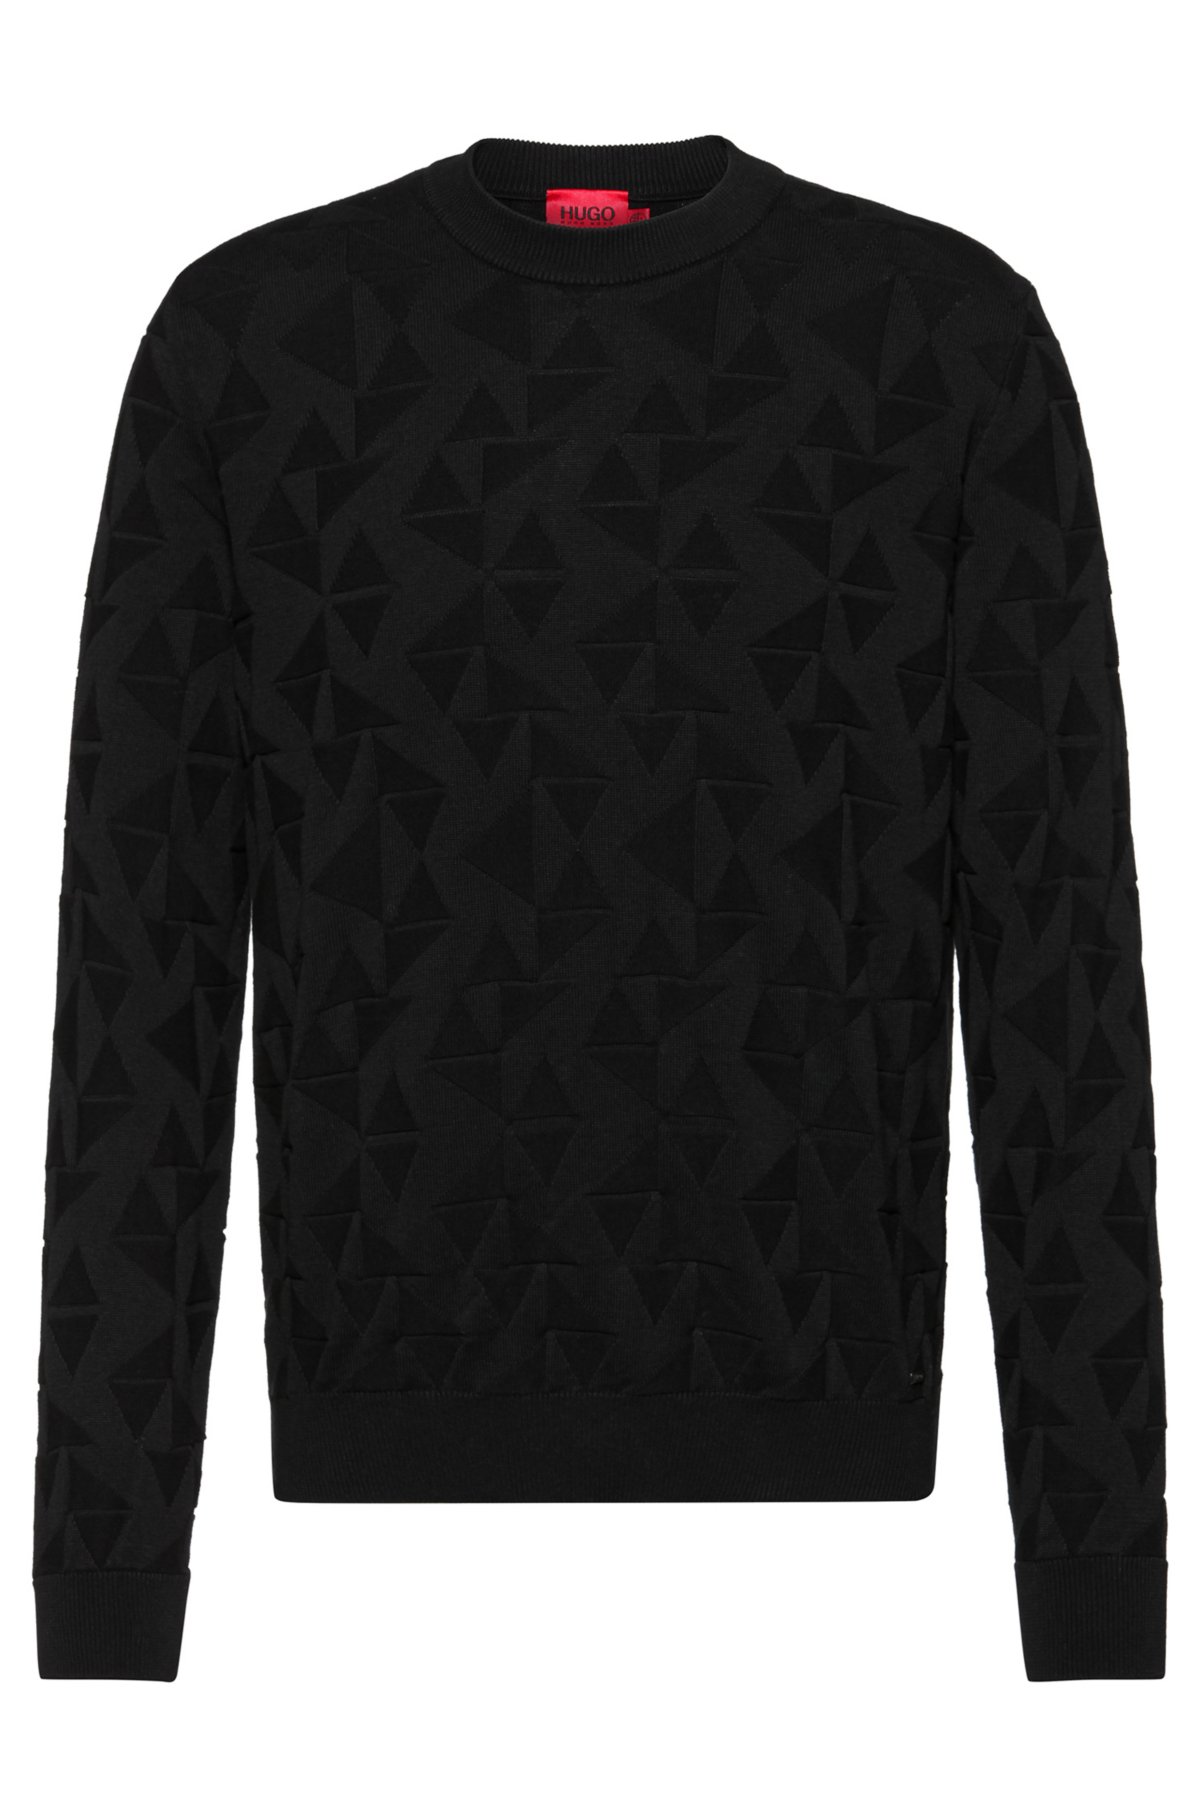 Louis Vuitton Mens Cardigans, Black, XXL (Stock Confirmation Required)